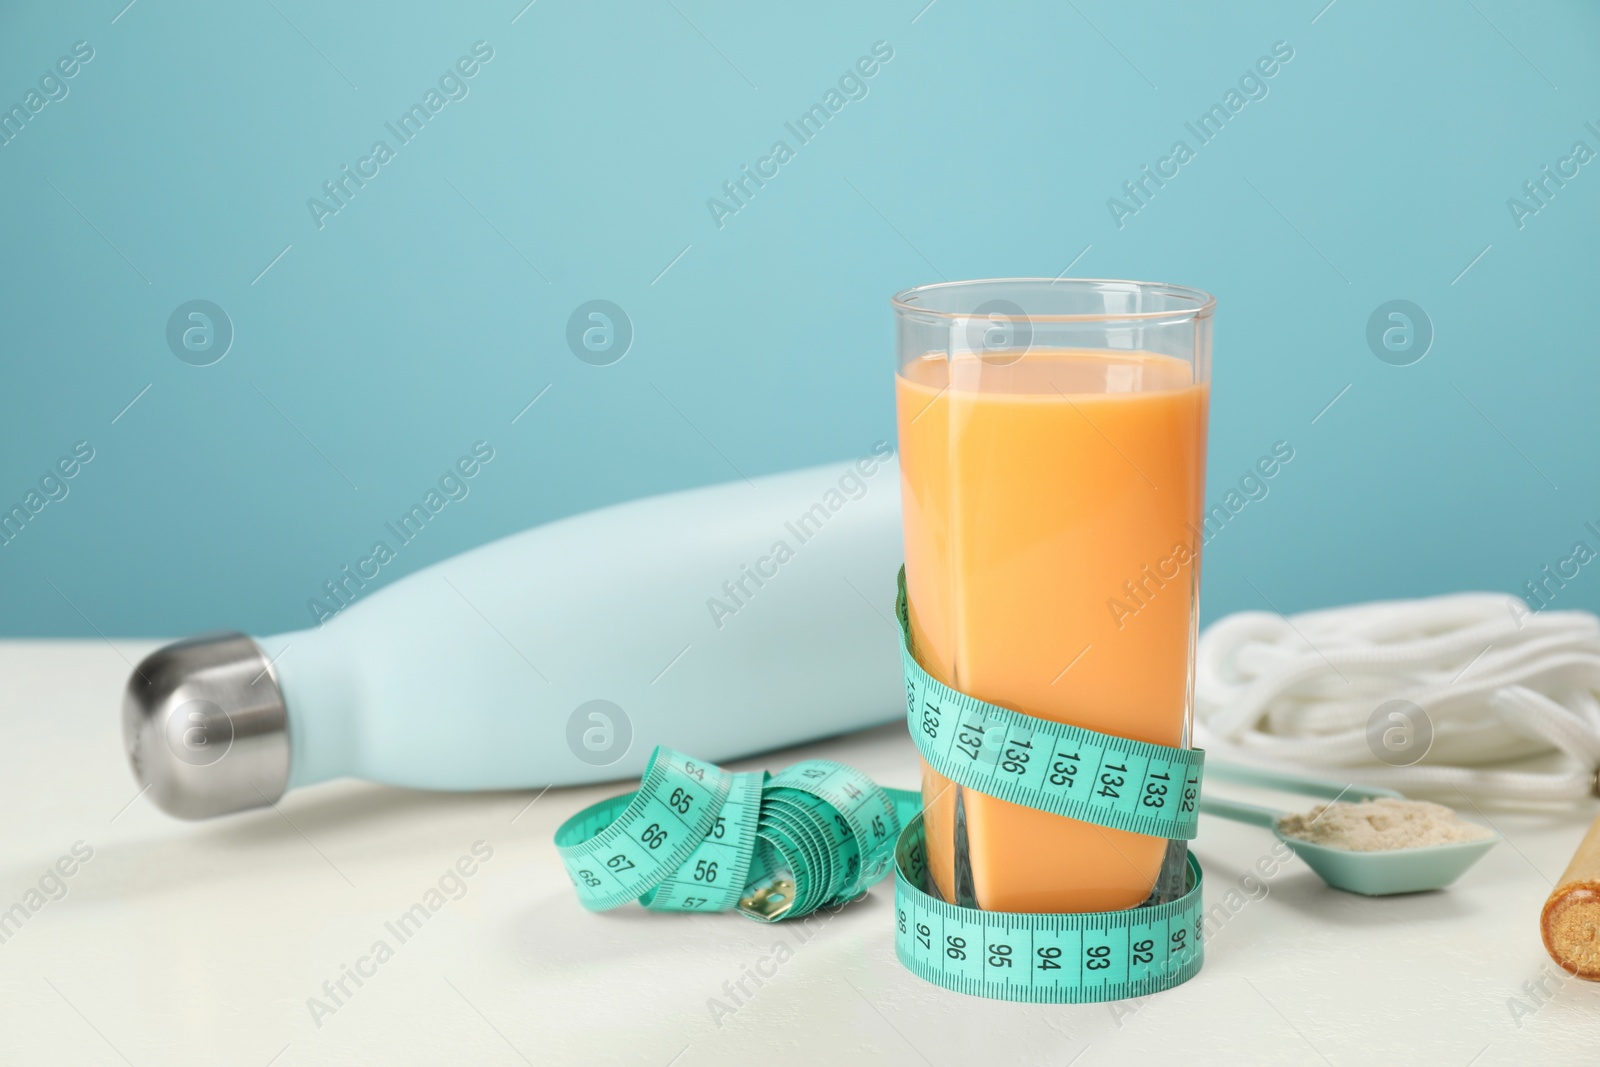 Photo of Tasty shake, bottle, measuring tape and powder on white table against light blue background. Weight loss